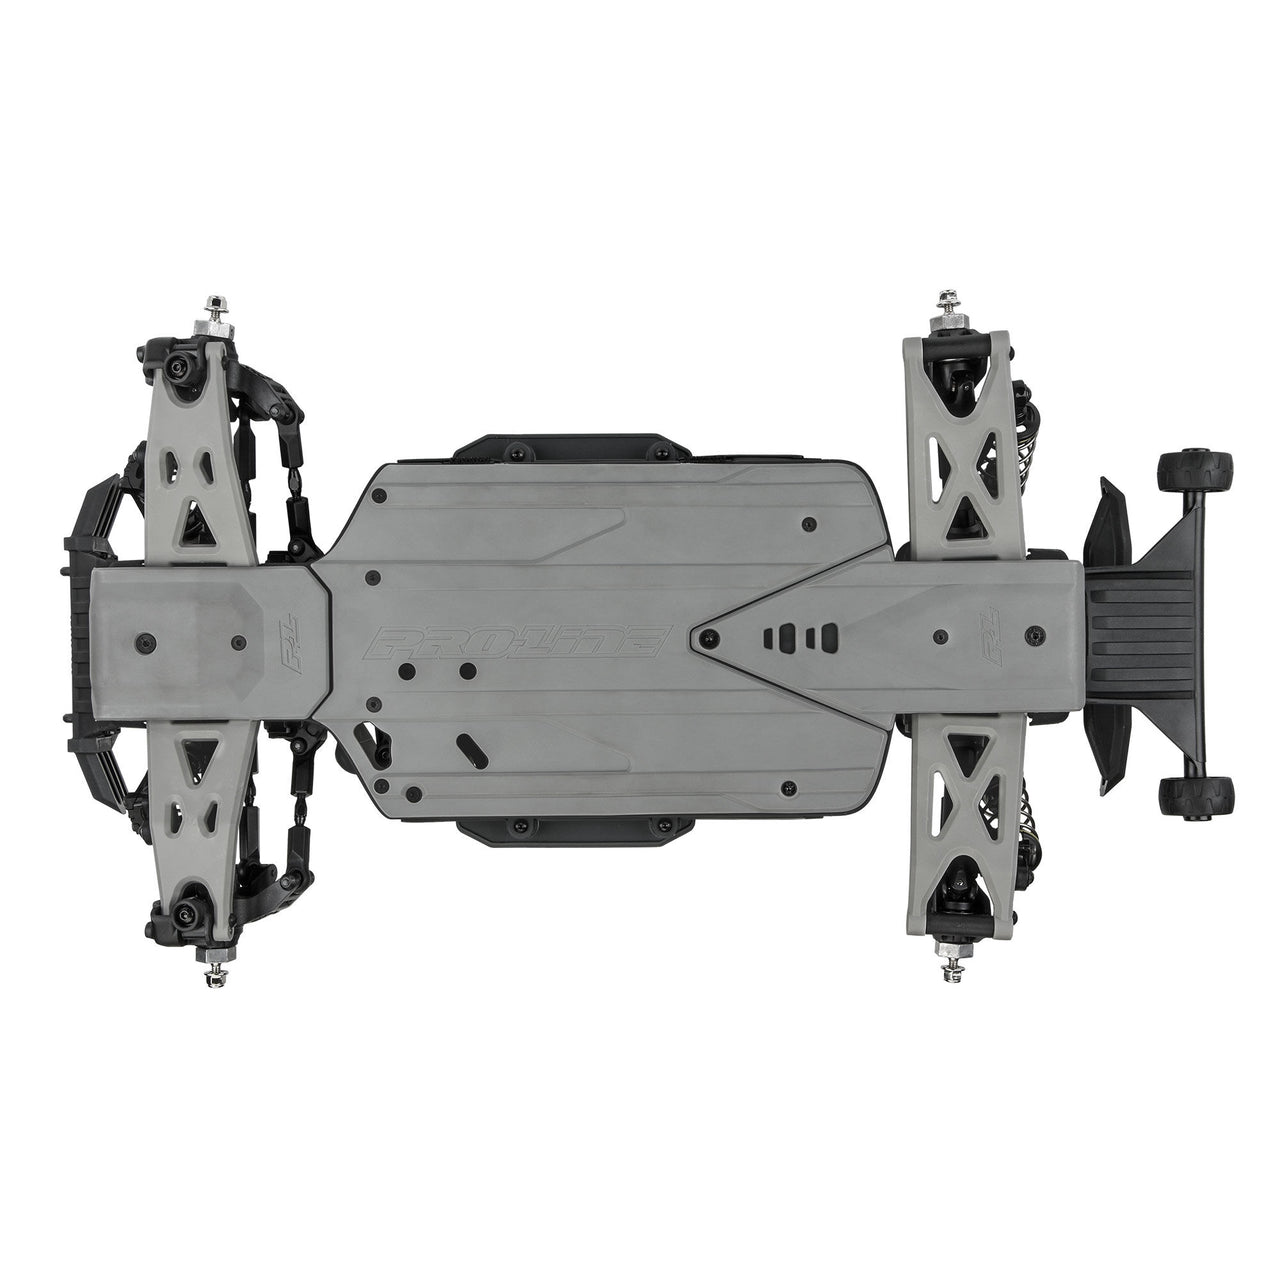 PRO639505 Bash Armor Front/Rear Skid Plates (Stone Gray) for ARRMA 3S Vehicles